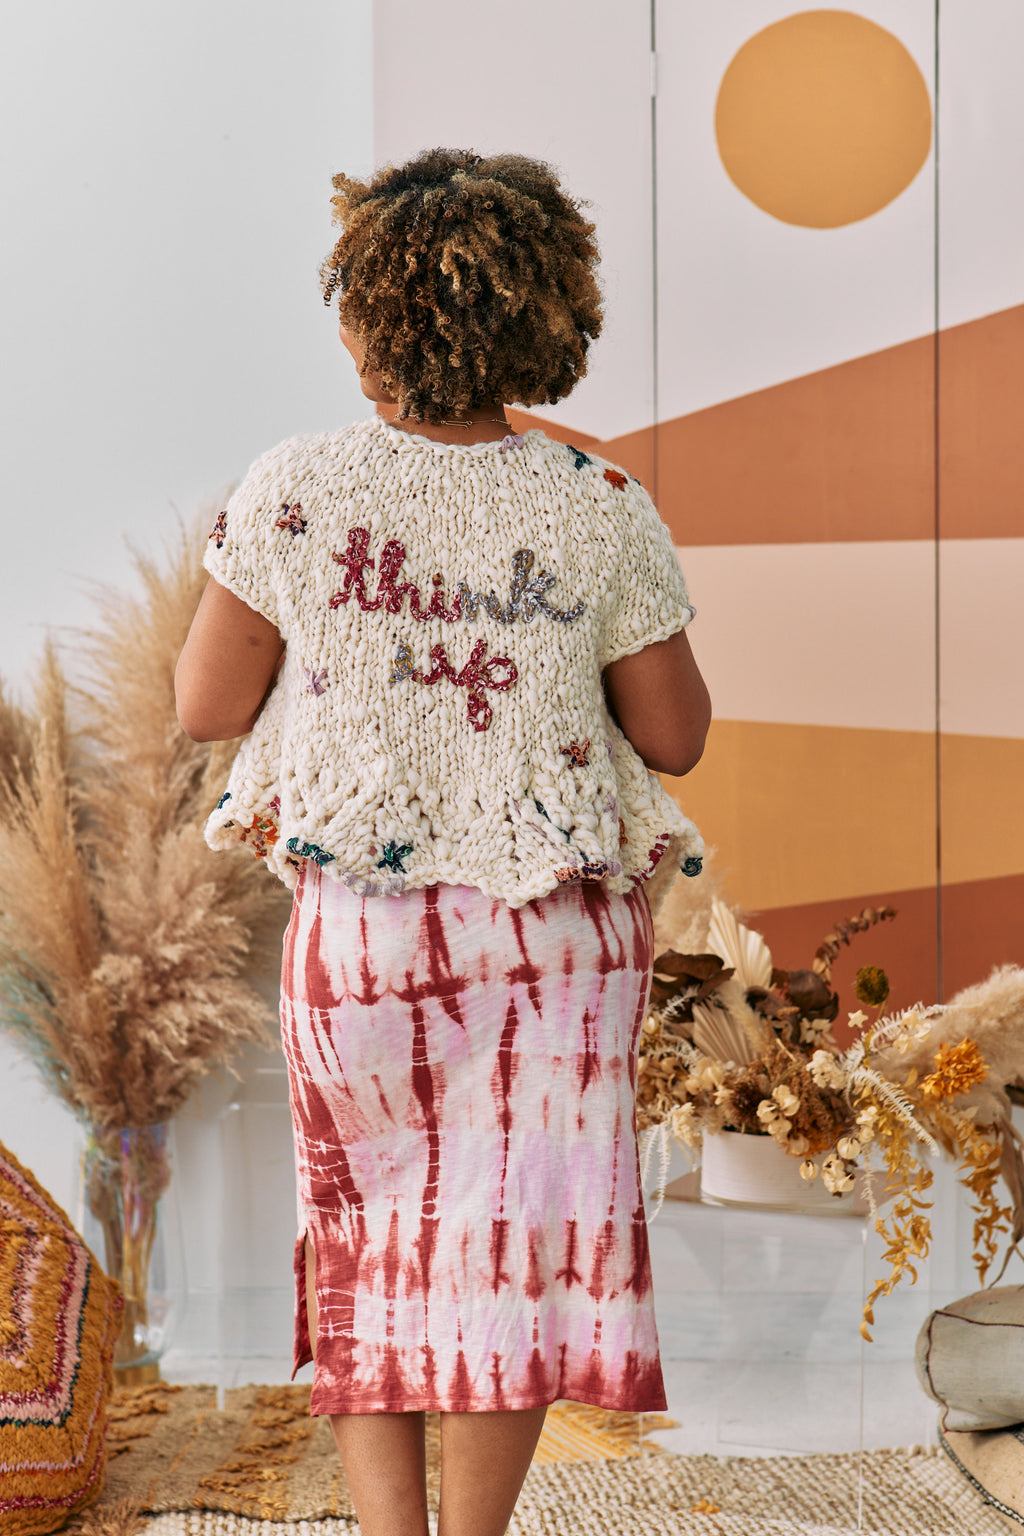 Model turned away from the camera to reveal a cardigan that says Think Up on the back